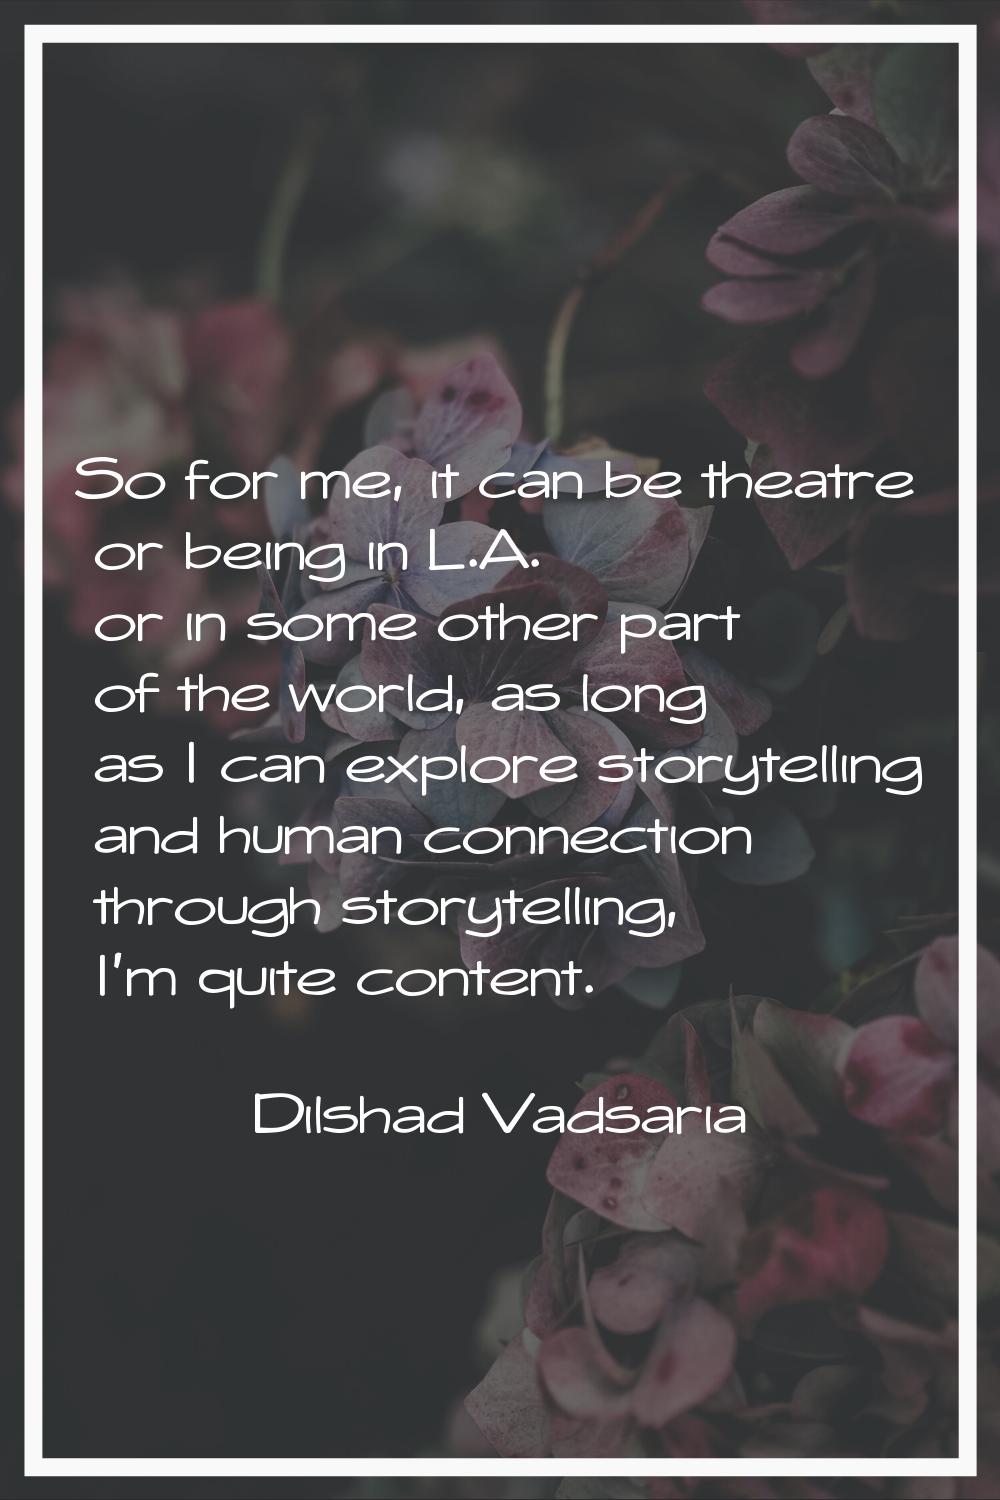 So for me, it can be theatre or being in L.A. or in some other part of the world, as long as I can 